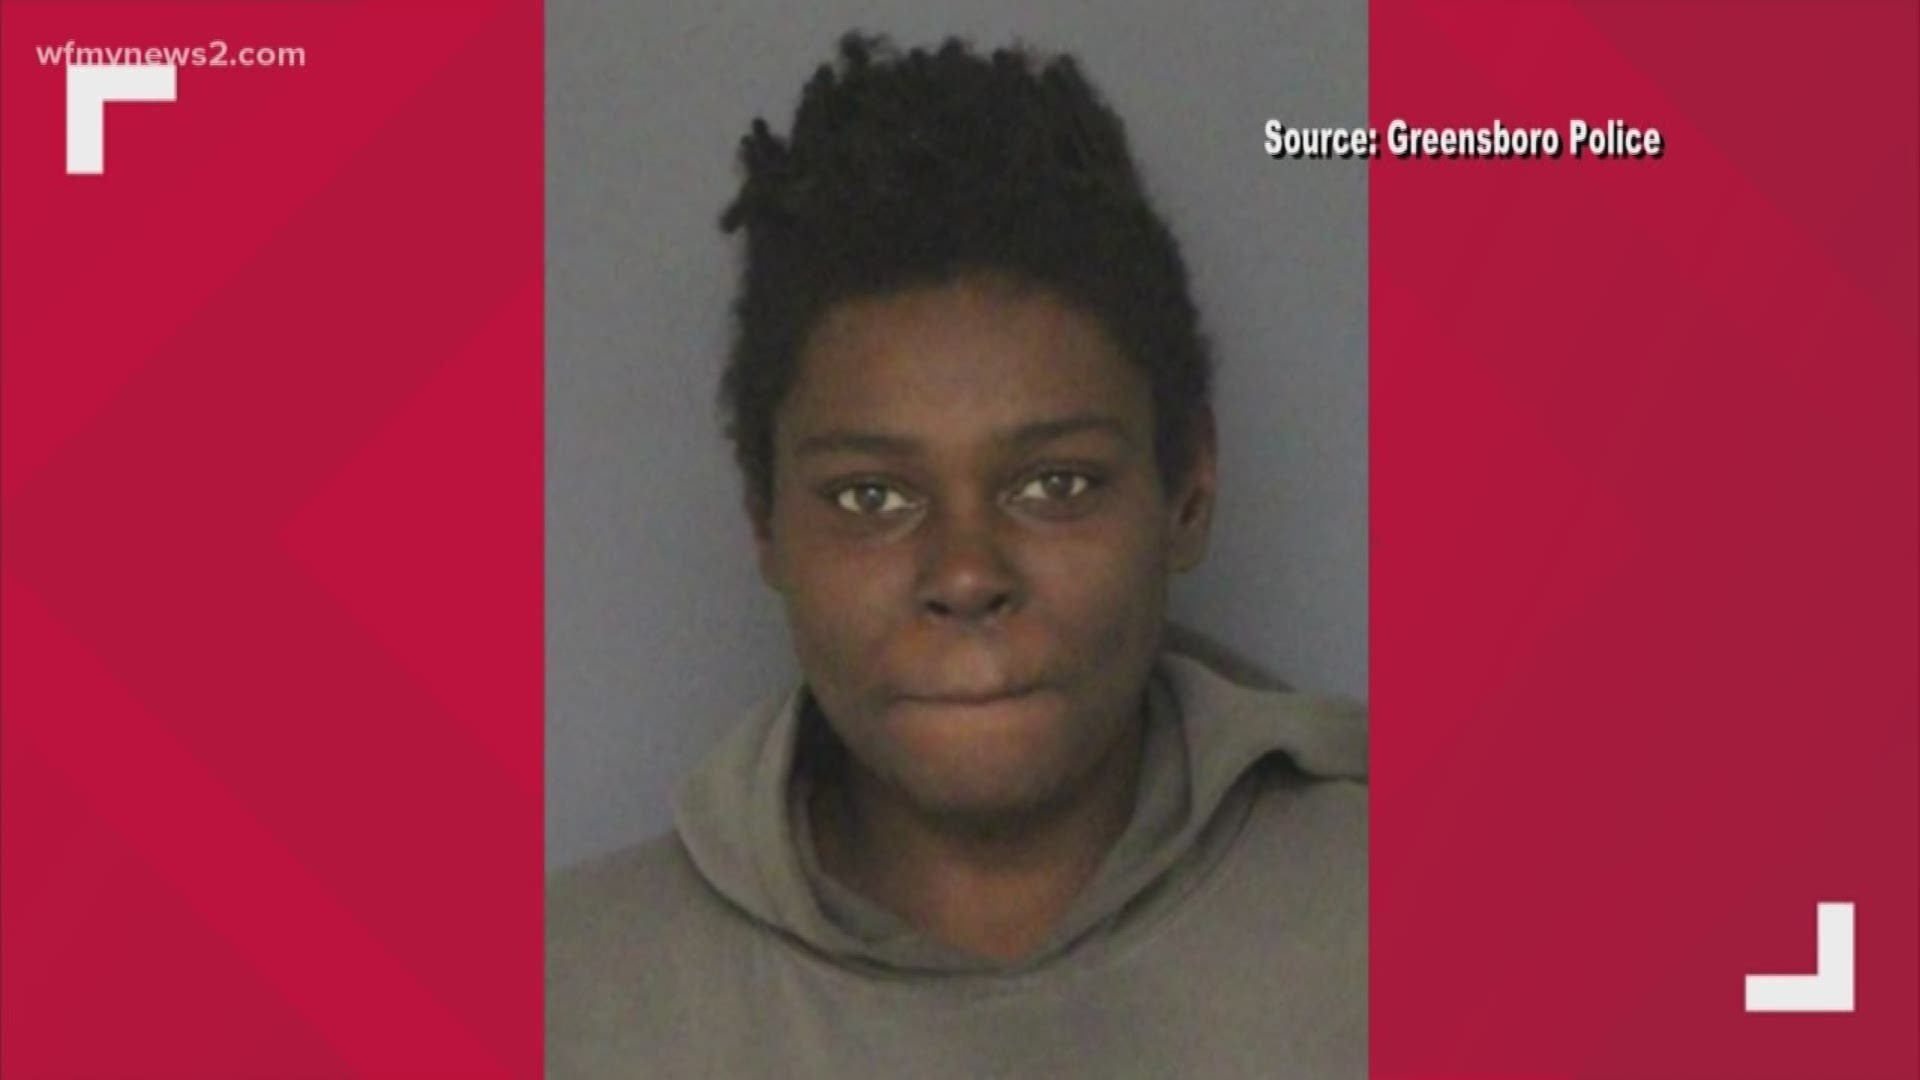 Police charged Keysha Davis, who's accused of a similar attack last December.